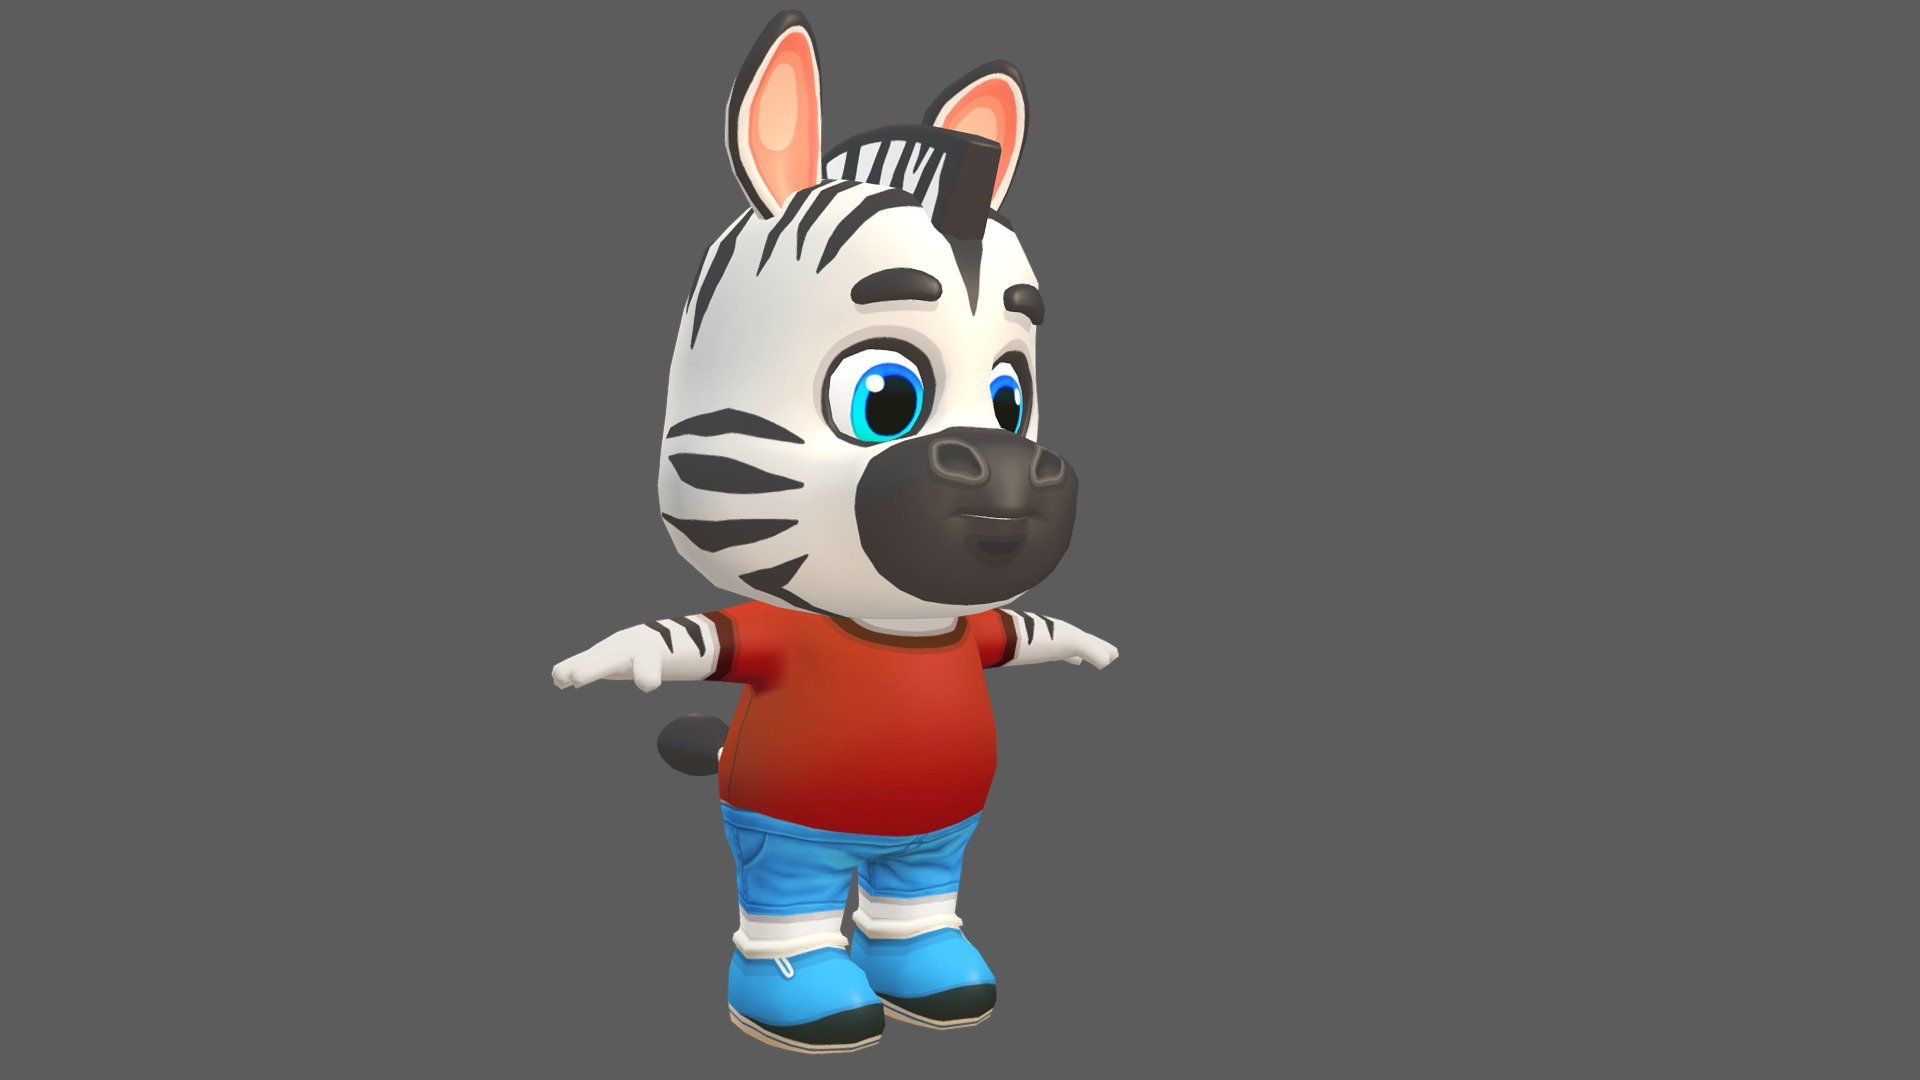 Zebra character for games and animations. The model is game ready and compatible with game engines.

Included Files:




Maya (Source files, Rig) for Unity and Unreal (.ma, .mb) - 2015 - 2020

FBX for Unity - 2014 - 2020

FBX for Unreal - 2014 - 2020

OBJ

Unity Project - Preconfigured Humanoid Rig

Supports Humanoid Animation:




Preconfigured Humanoid Rig &amp; Animation Clips

Unity Humanoid compatible FBX

Mixamo

Low poly model with four texture resolutions 4096x4096, 2048x2048, 1024x1024 &amp; 512x512.

The package includes 20 Animations:




Walk

Run

Idle

Jump

Leap left

Leap right

Death

Skidding

Roll

Crash

Power up

Whirl

Whirl jump

Waving in air

Backwards run

Dizzy

Gum Bubble

Gliding

Waving

Looking behind

The model is fully rigged and can be easily animated or modified if required.

The model is game ready at:




3938 Polys

3946 Verts

UV mapped with non-overlapping UV's. The shadows and lights are baked in the texture 3d model